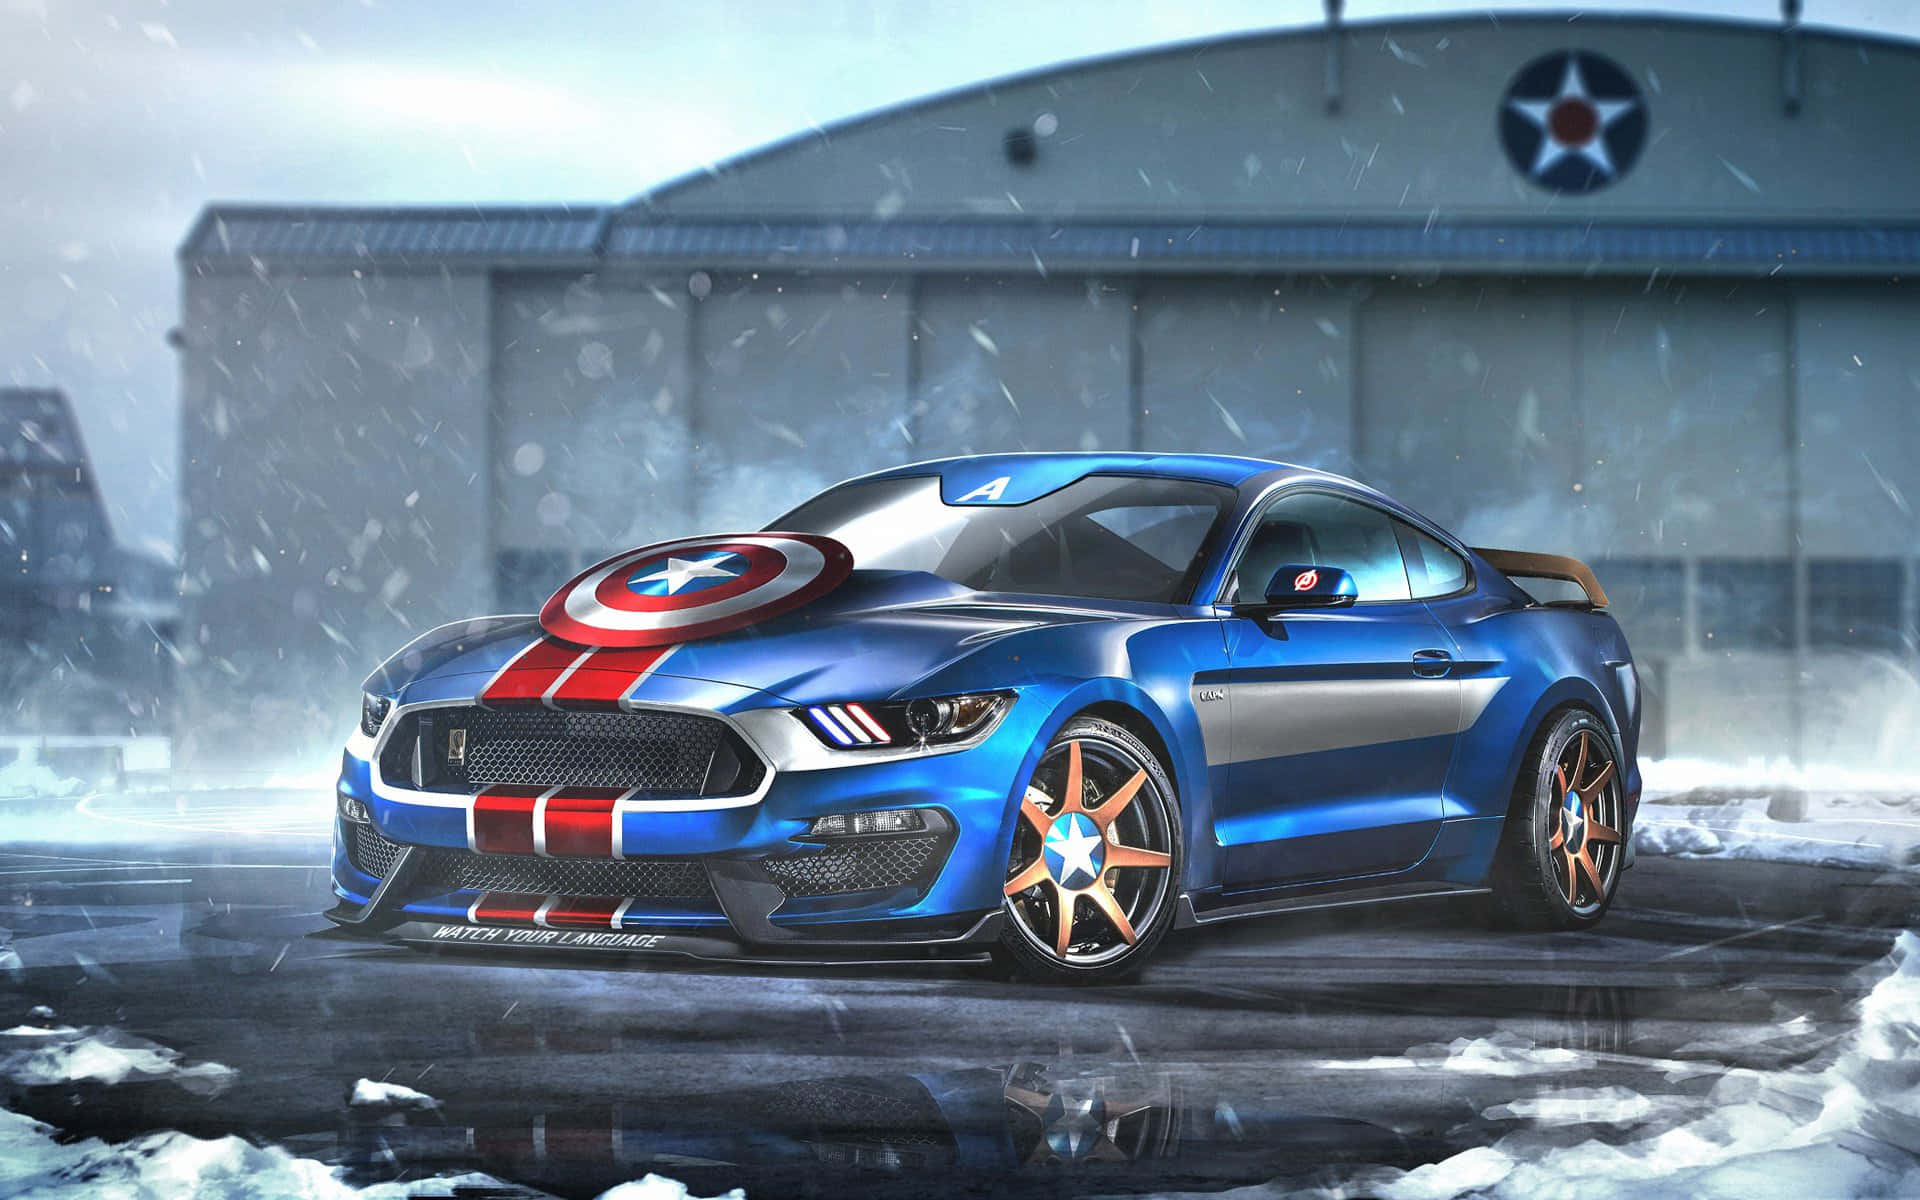 Caption: Majestic Ford Mustang Gt350r In Full Throttle Wallpaper